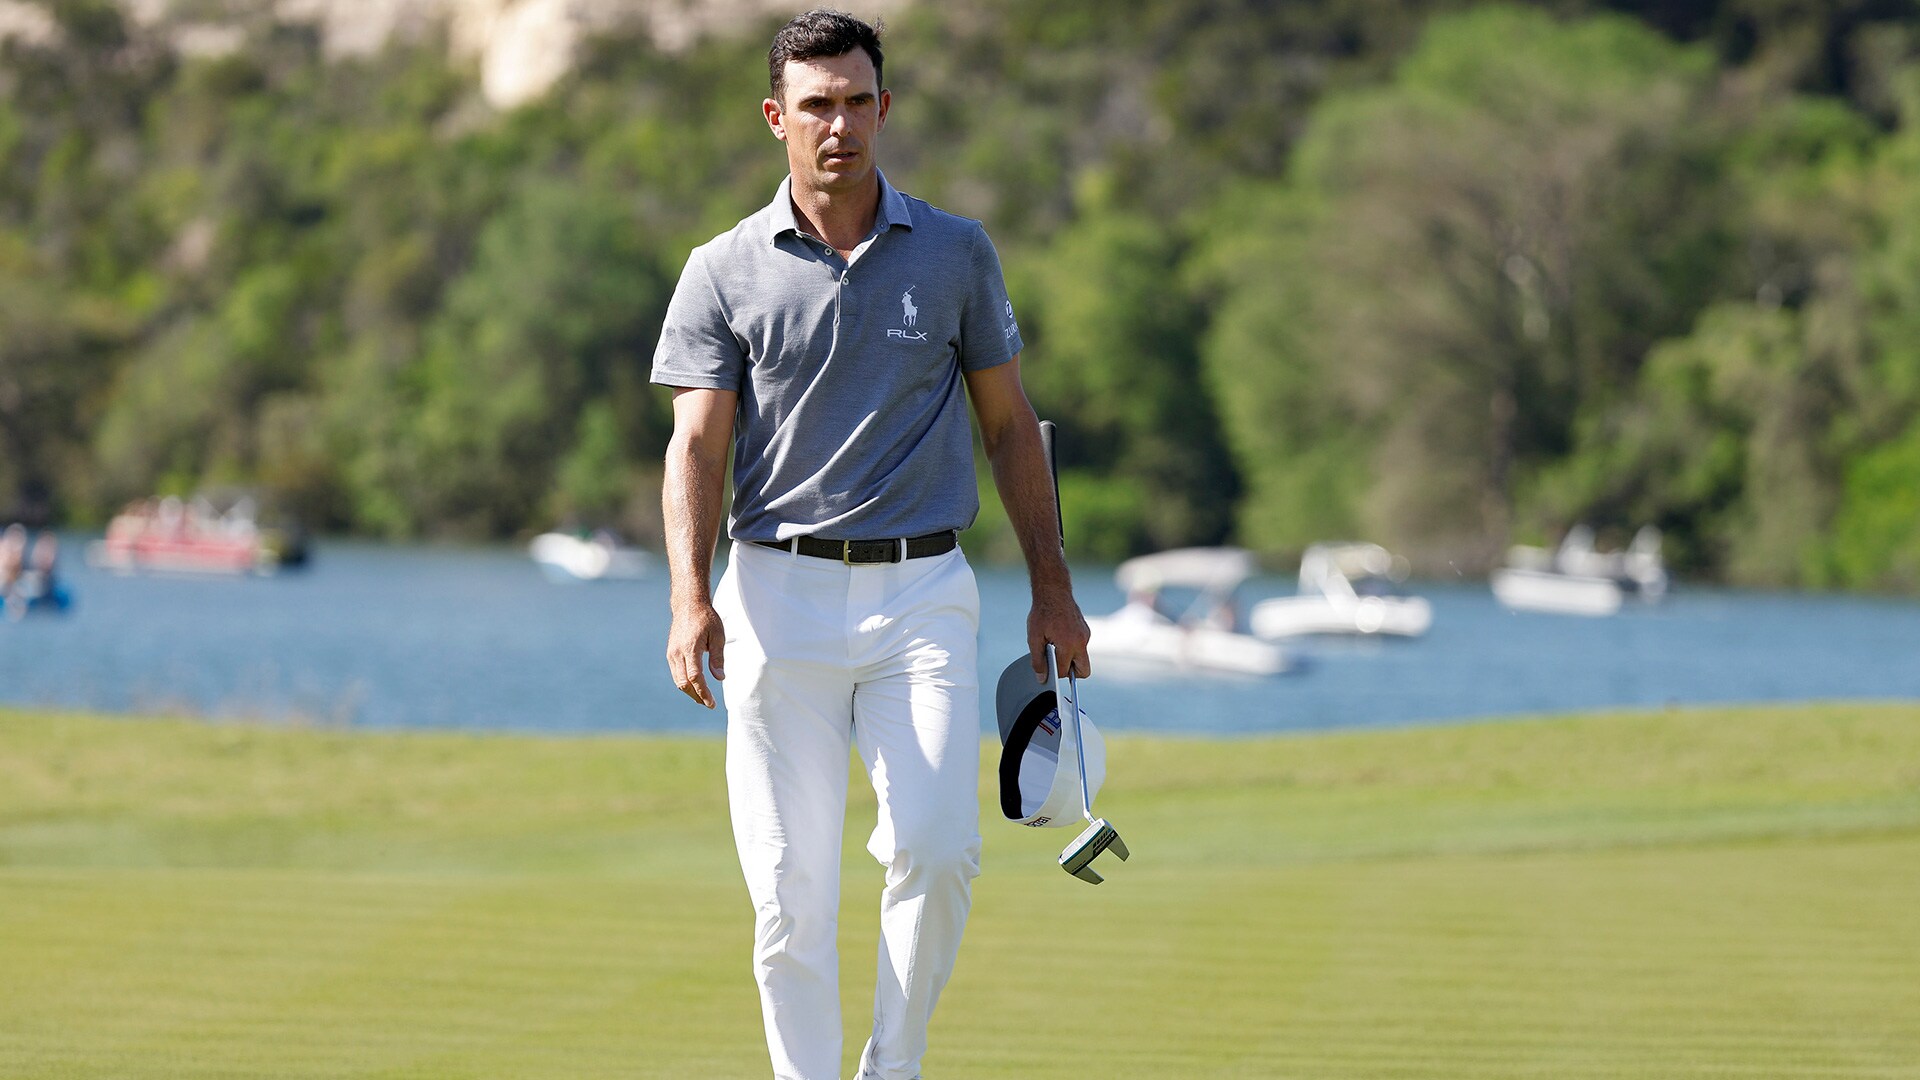 Billy Horschel moves on with new putter and new ball at WGC-Match Play